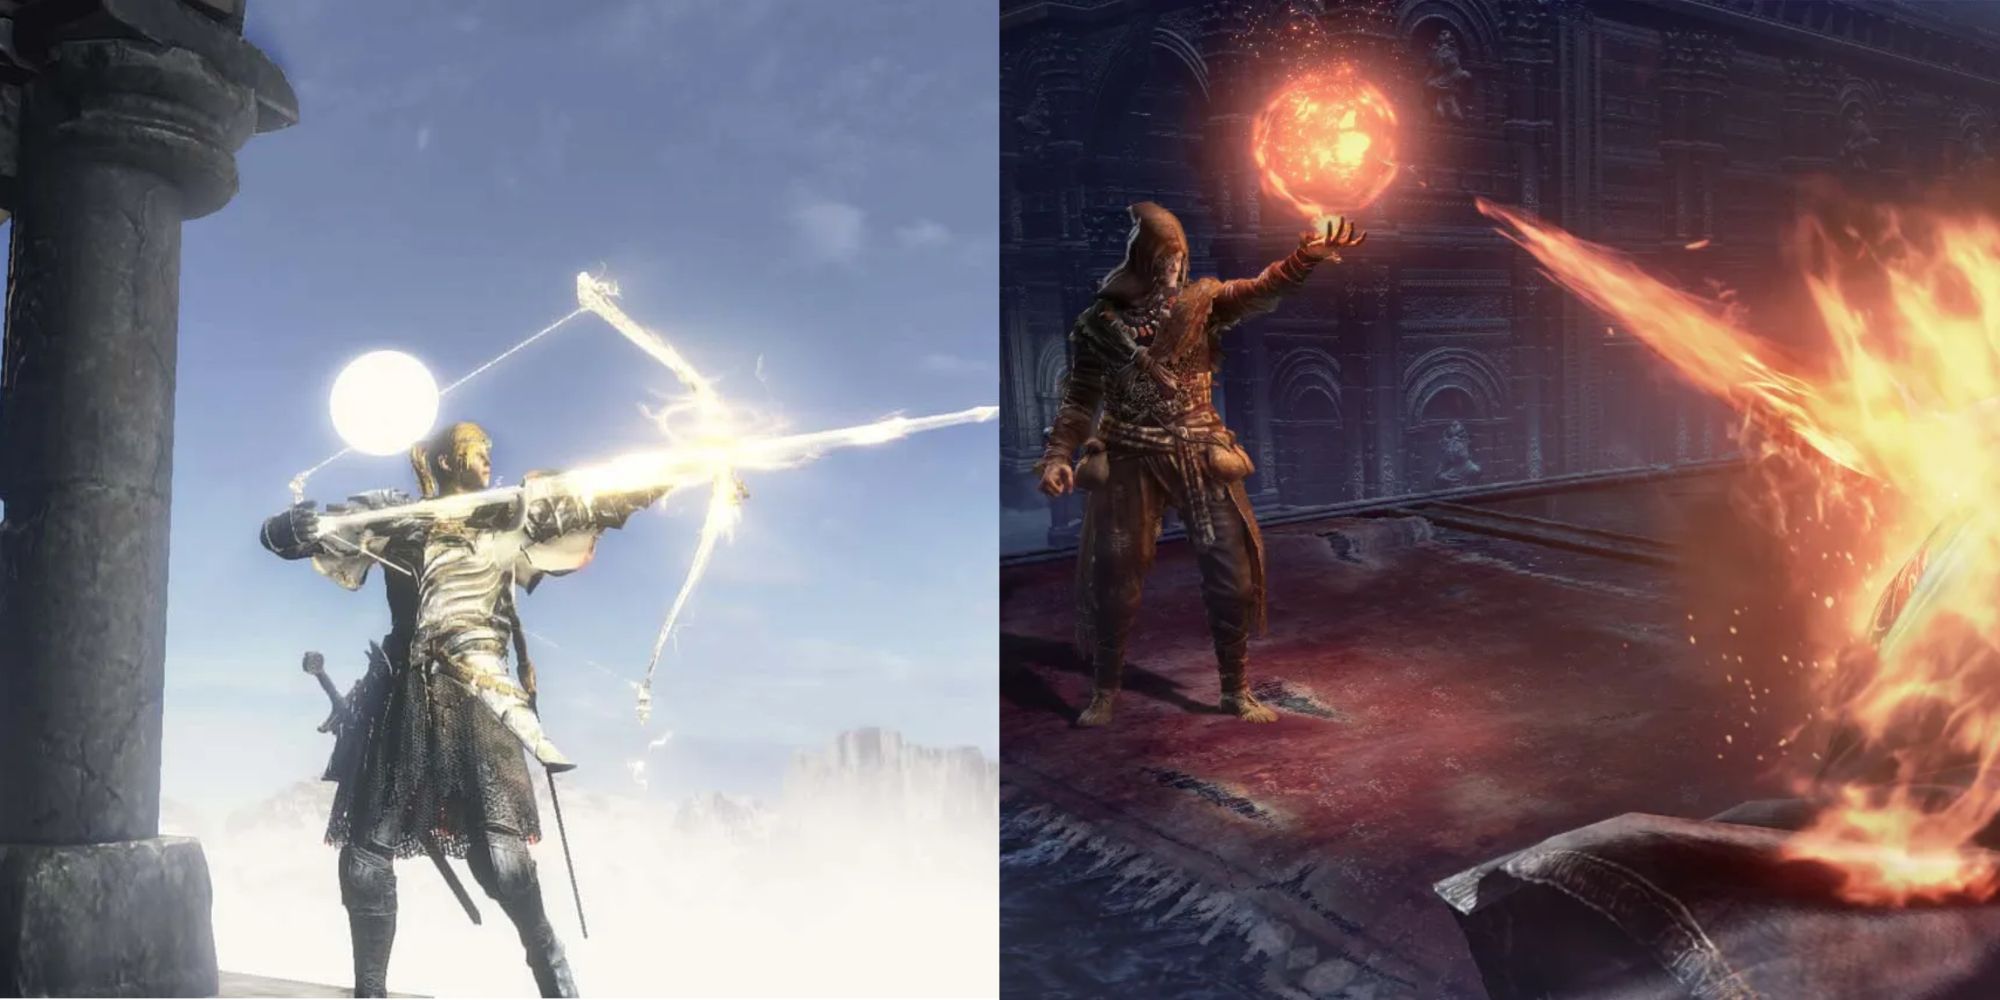 Split image showing player using Lightning Arrow and a Fire Miracle.